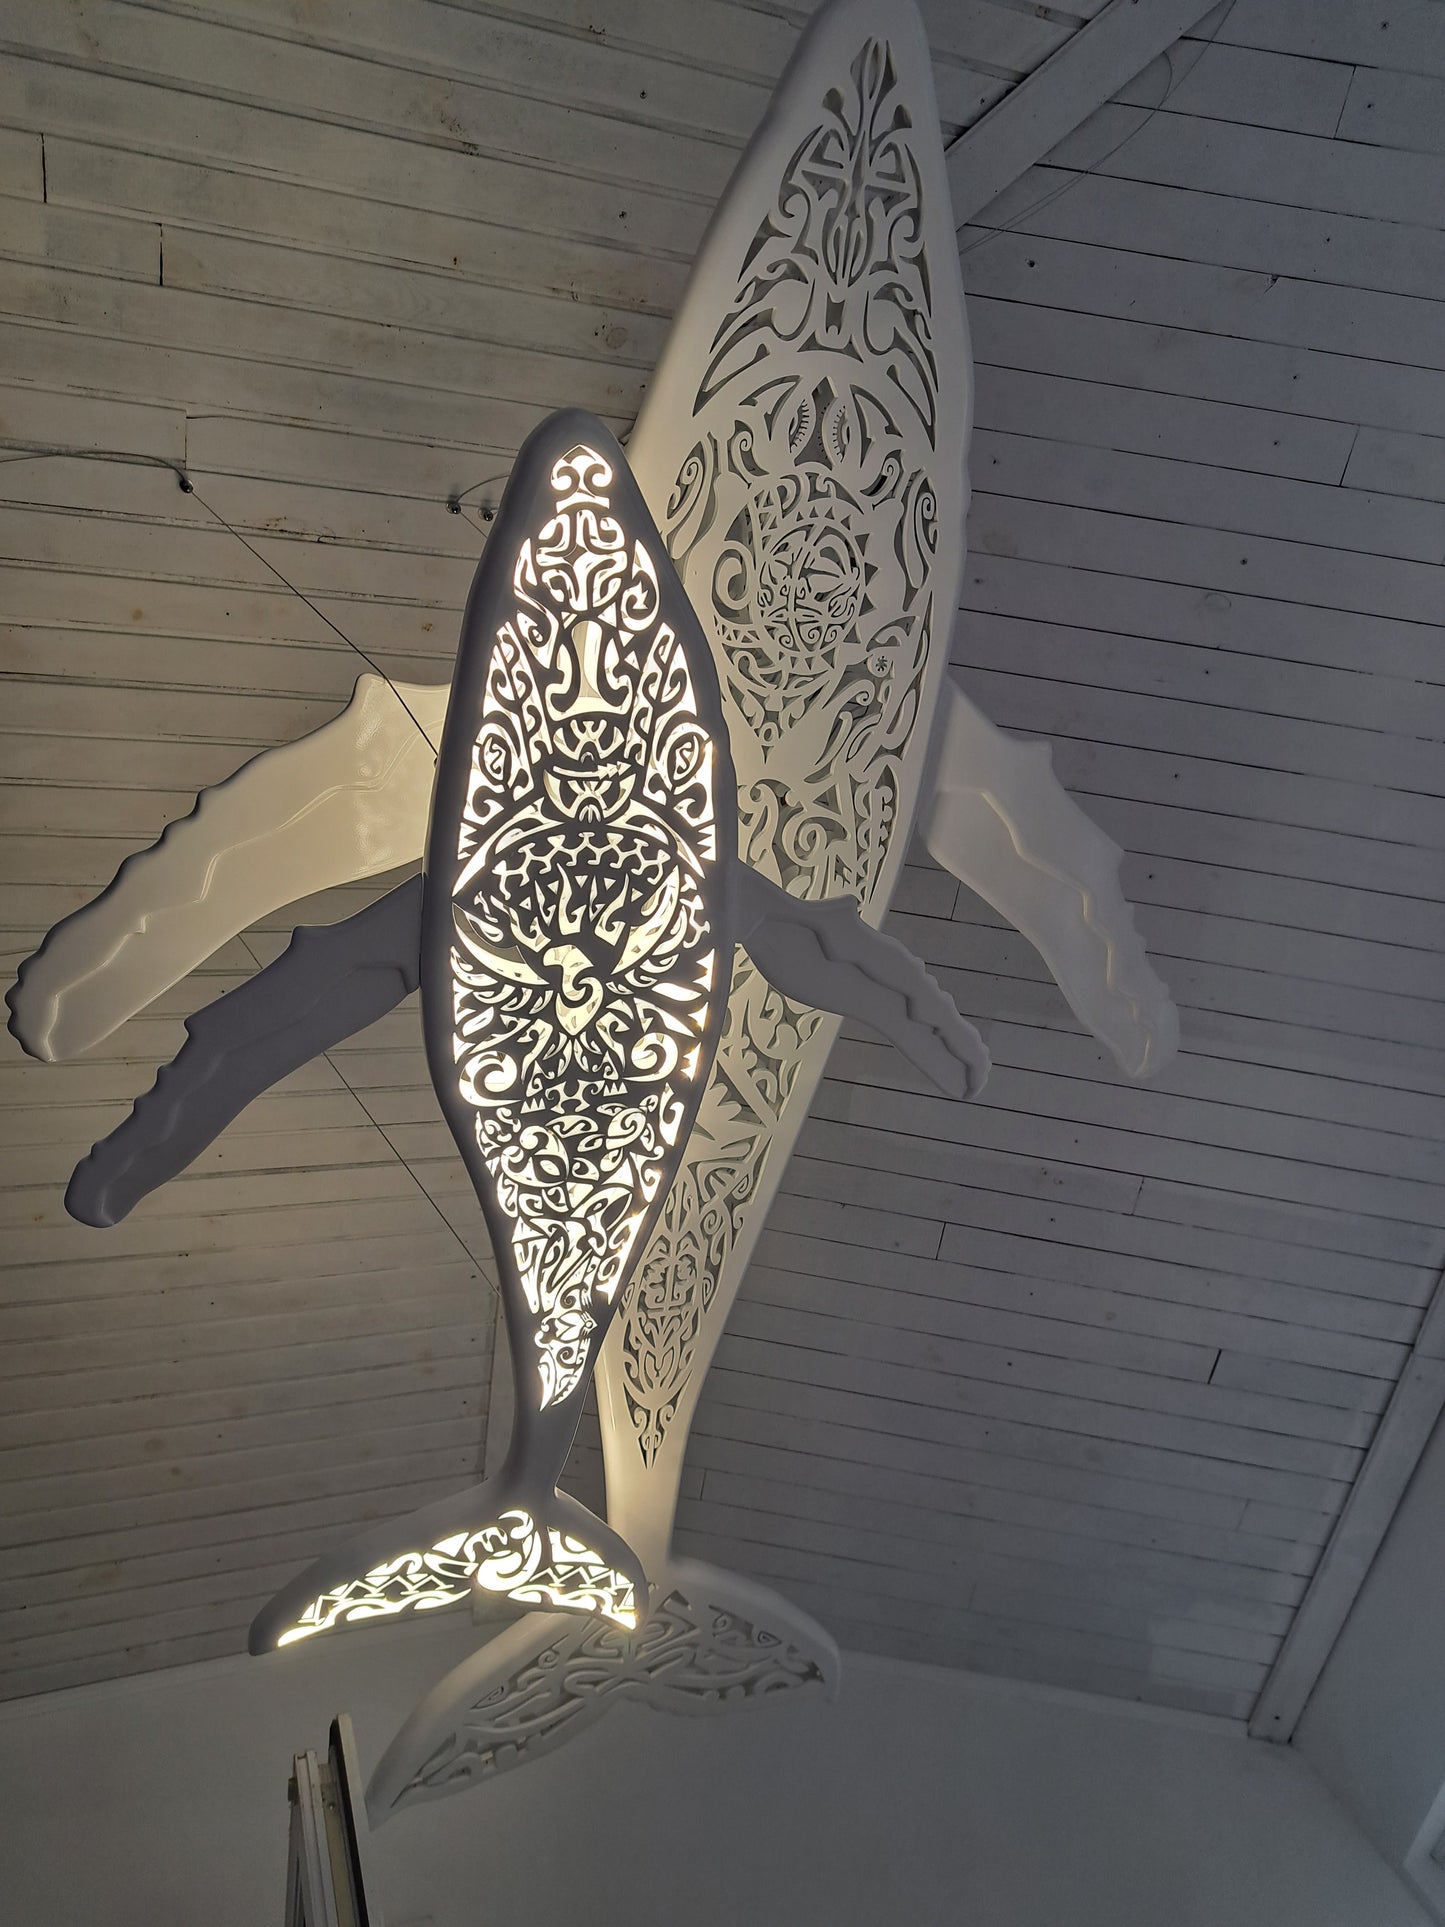 Handcrafted unique Whale with baby whale ceiling chandelier:led wall lamps for beach coastal or nautical home room decor in Maori surf style